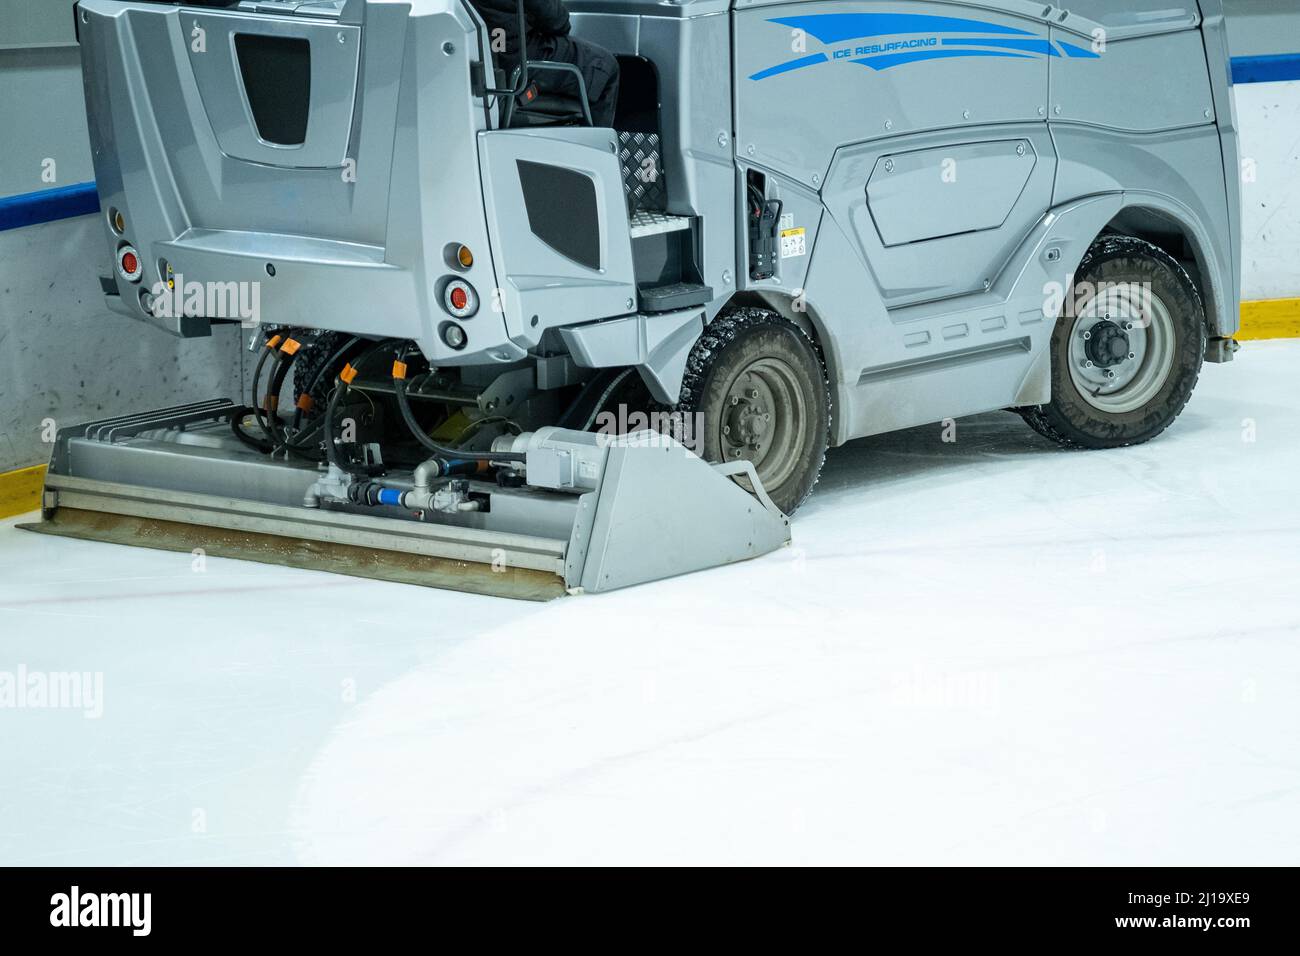 Helsinki / Finland - MARCH 22, 2022: Closeup of electric operated Ice resurfacer machine cleaning the ice surface Stock Photo